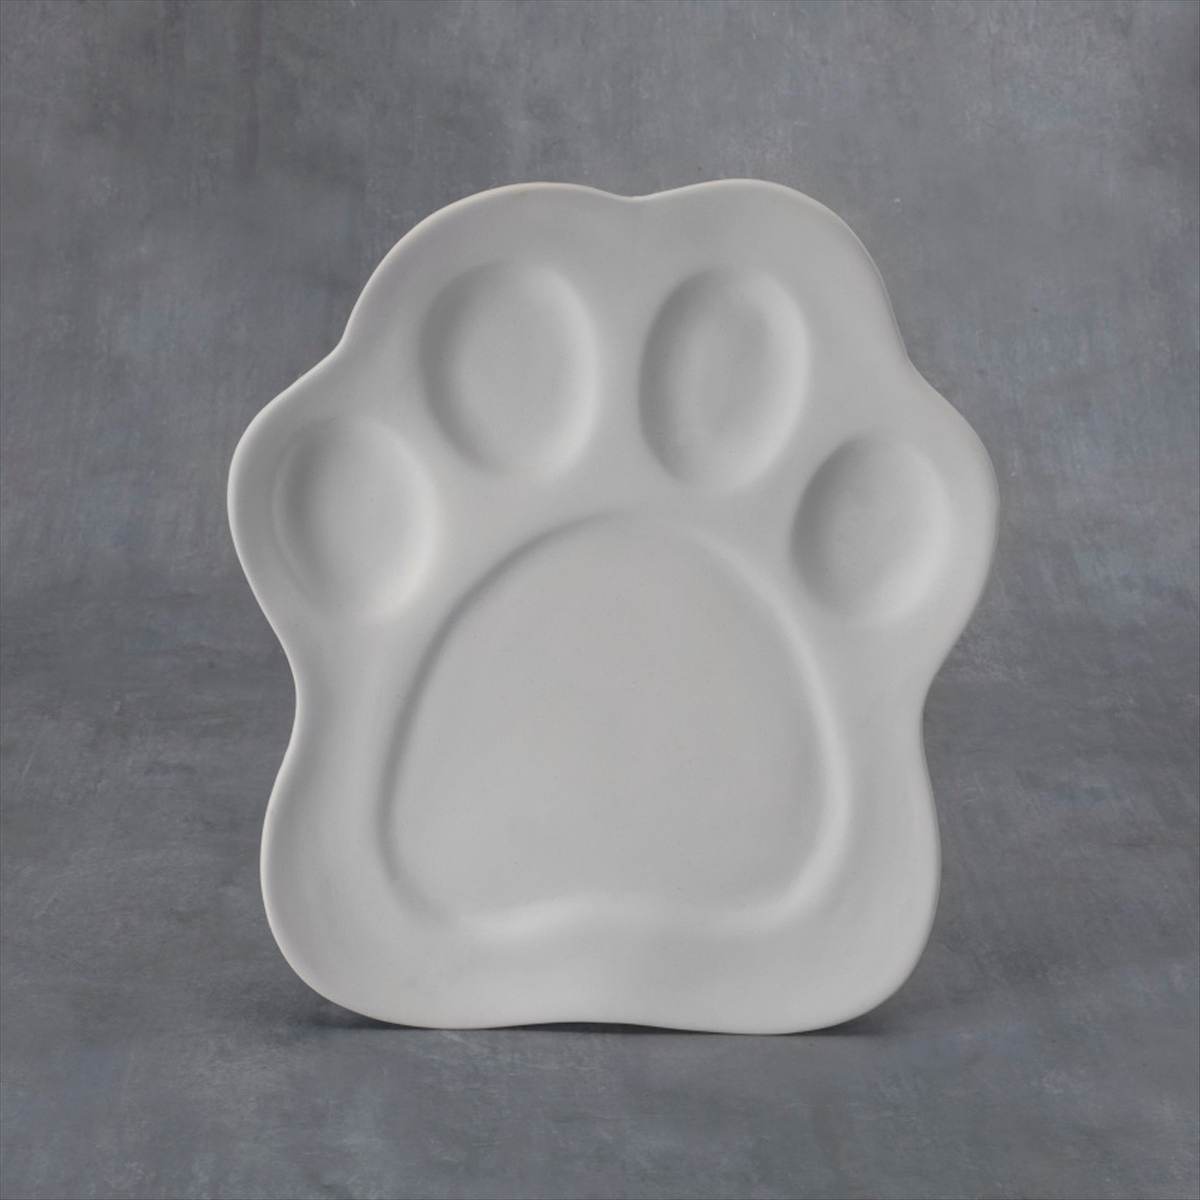 Duncan 38242 Bisque Paw Print Plate